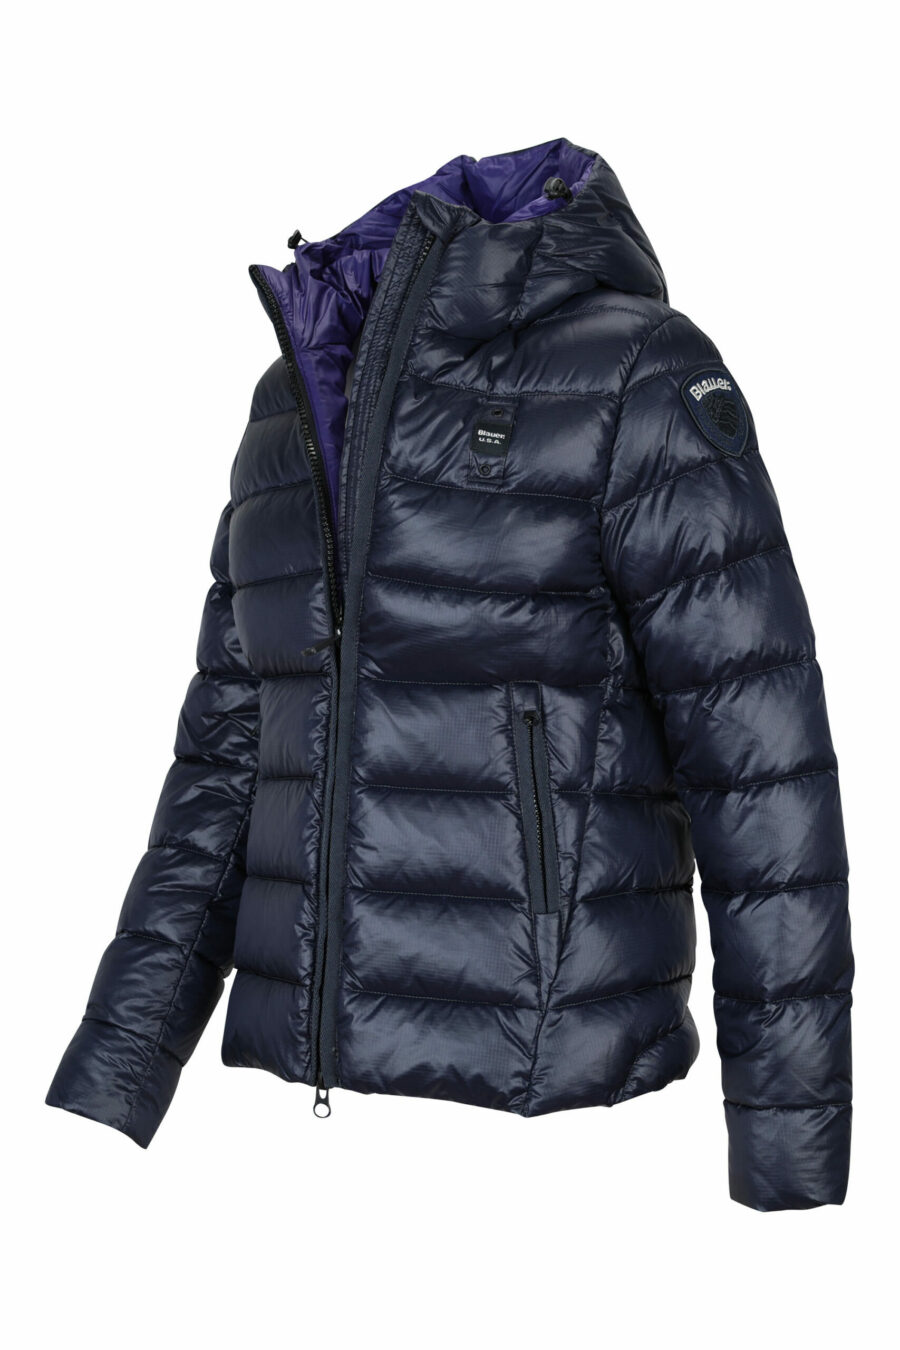 Blue straight lined hooded jacket with violet inside with logo patch - 8058610644932 2 scaled